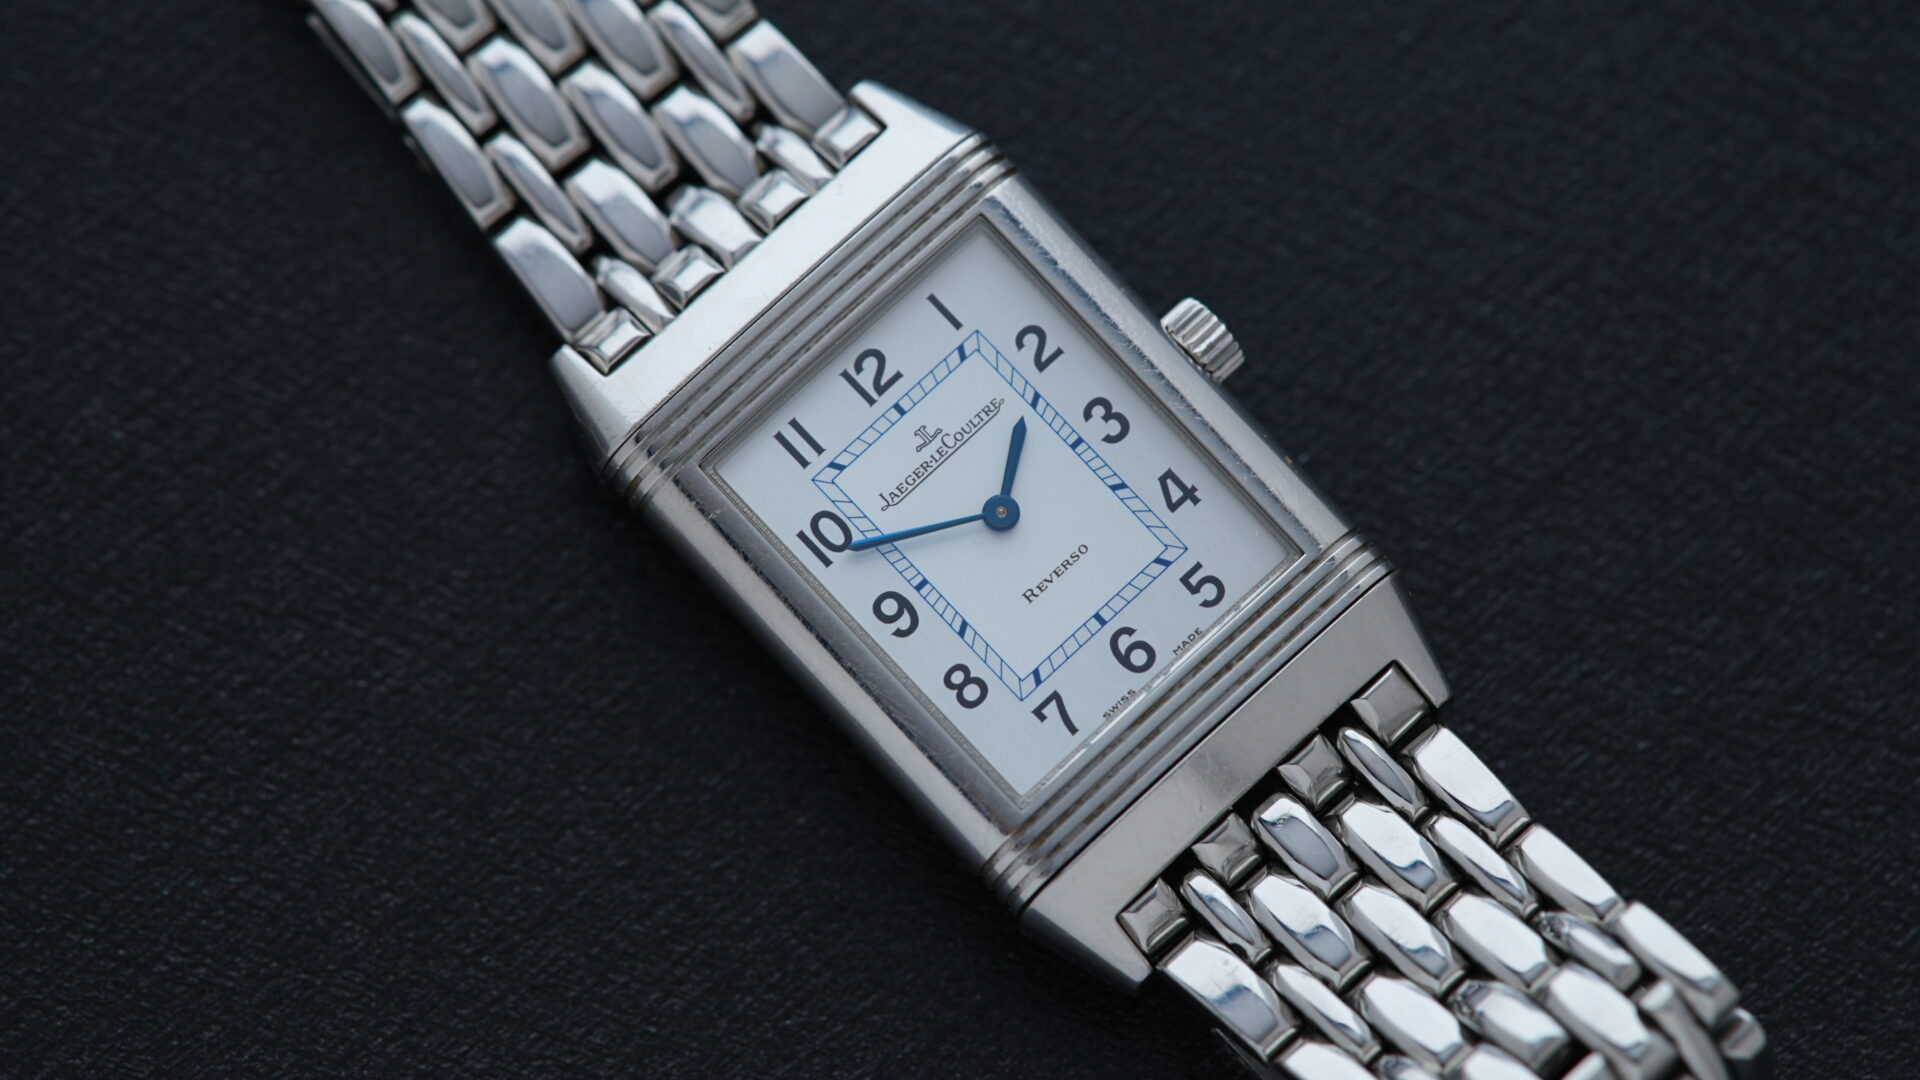 Jaeger-LeCoultre Reverso Classique 252.8.86 watch featured on an angle under white light.